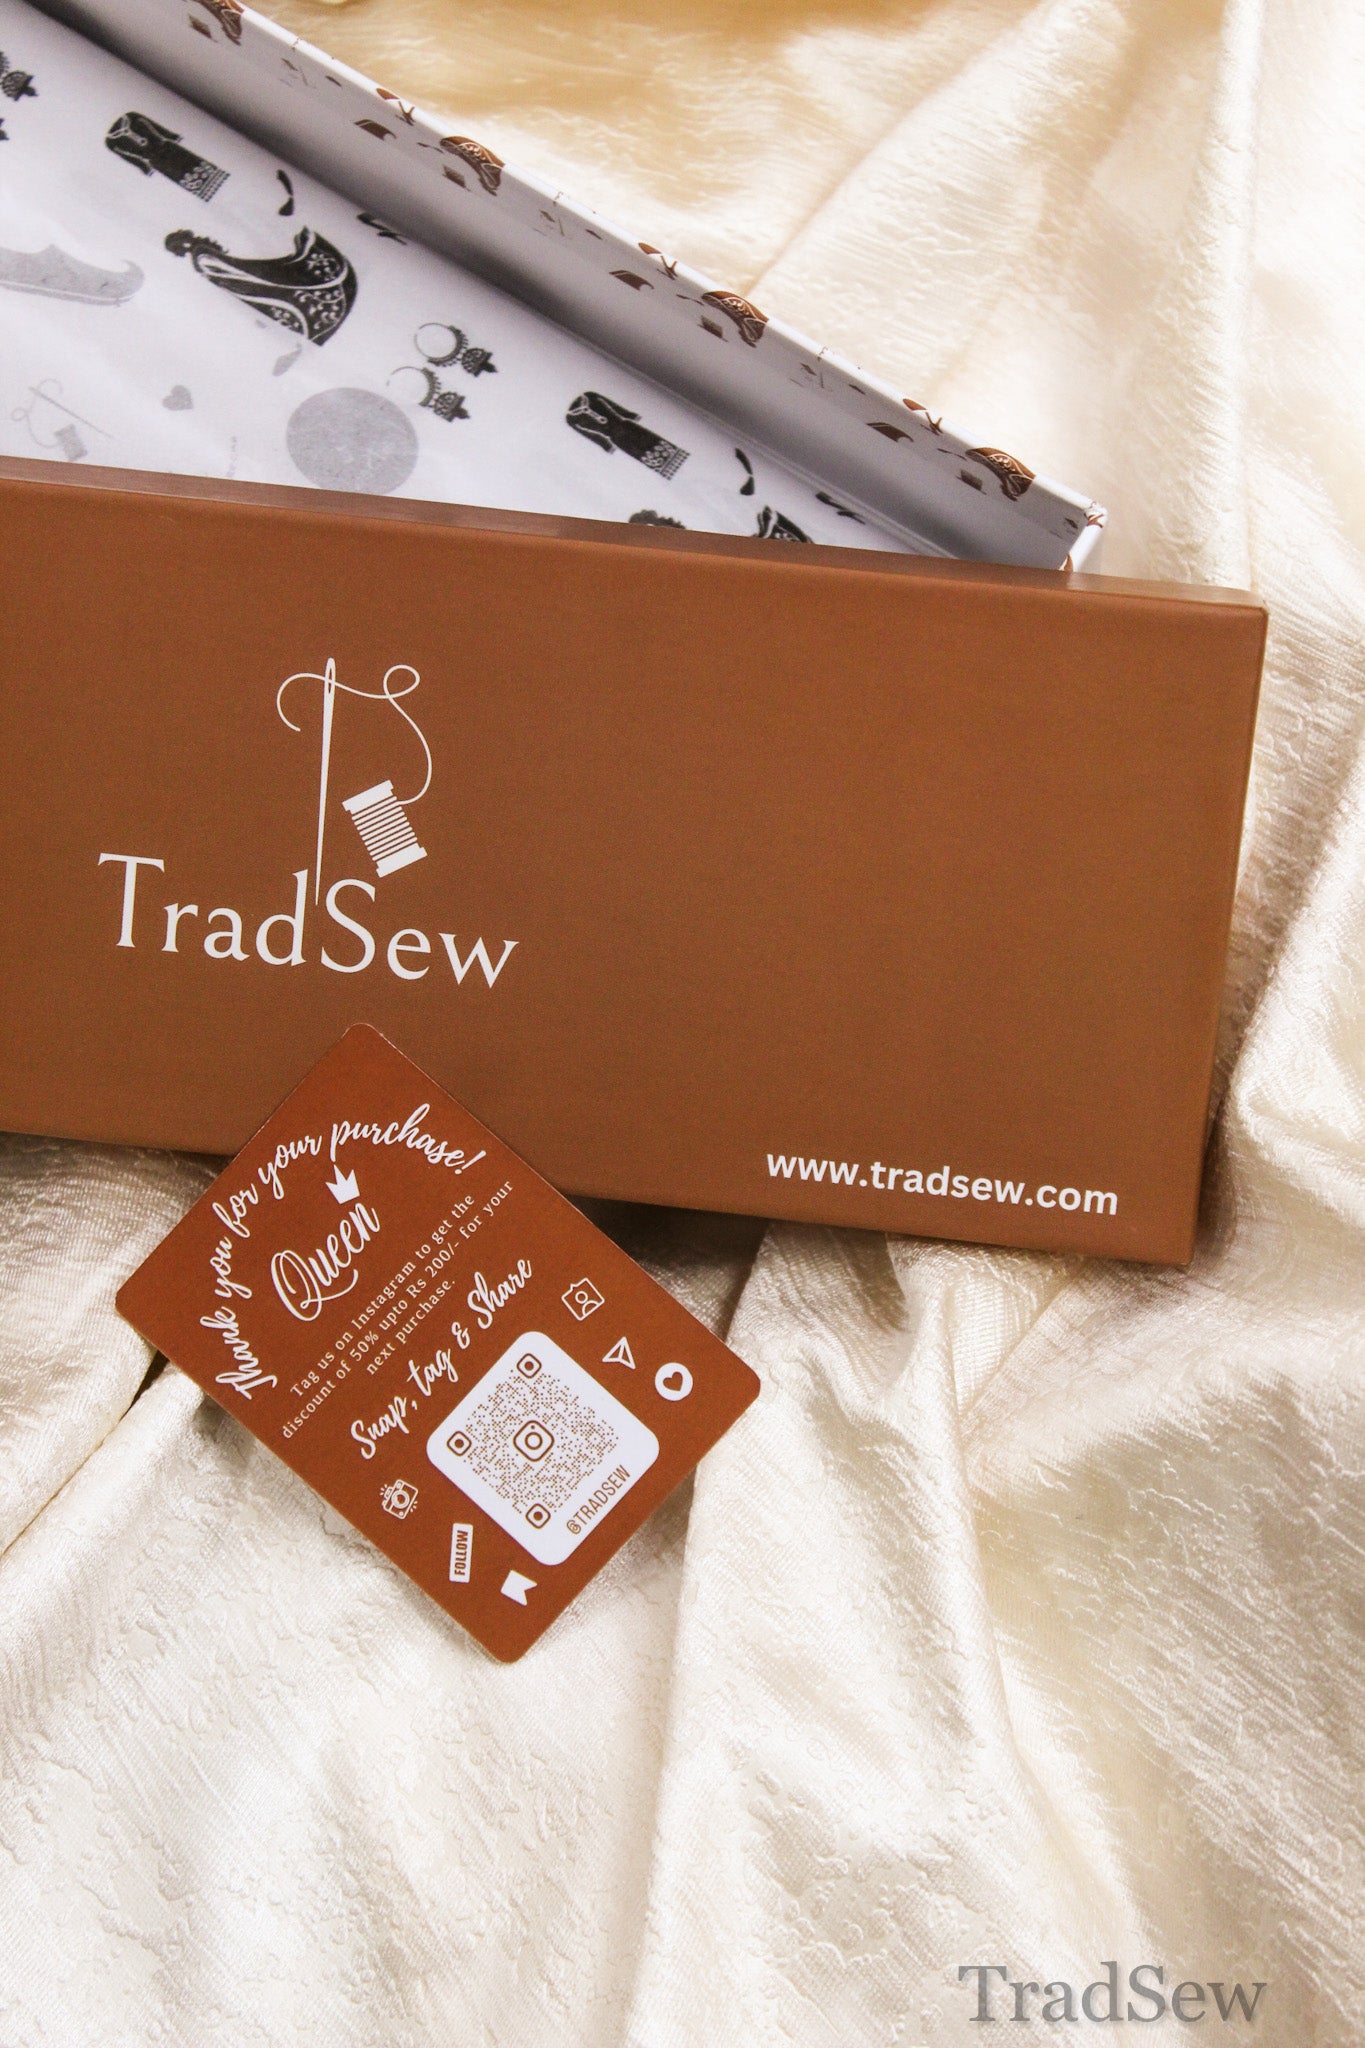 Packaging box of Premium Leather Jutti by Tradsew